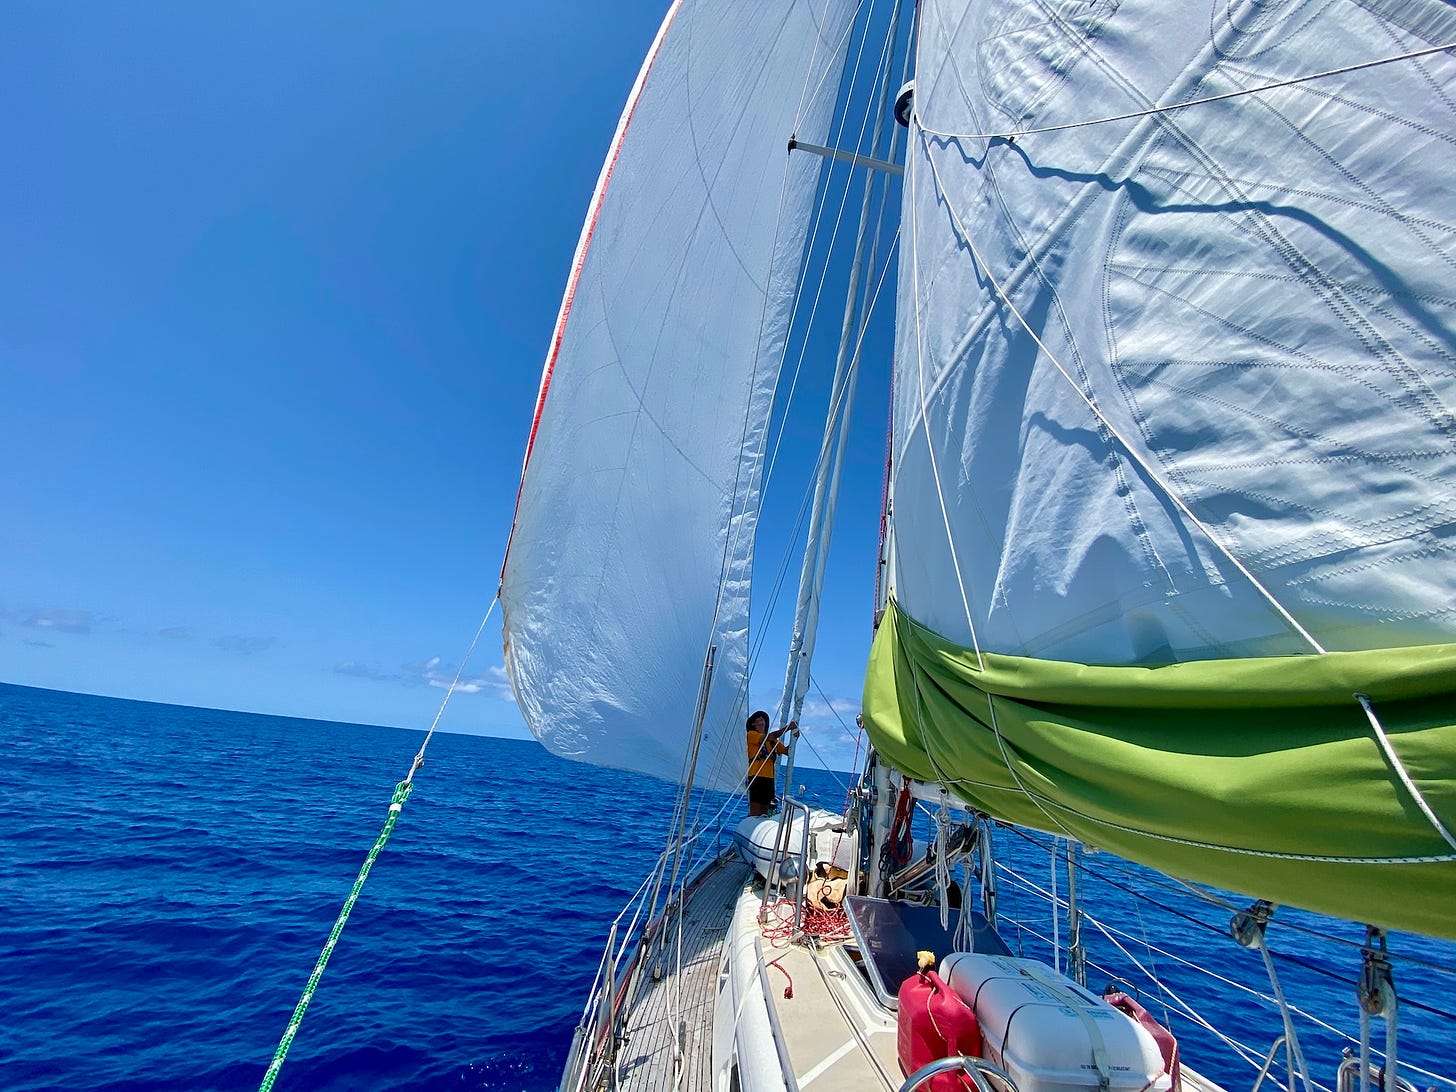 Image: A brilliant blue sky over a brilliant blue ocean with a sailboat in the foreground as seen from the stern looking forward. 